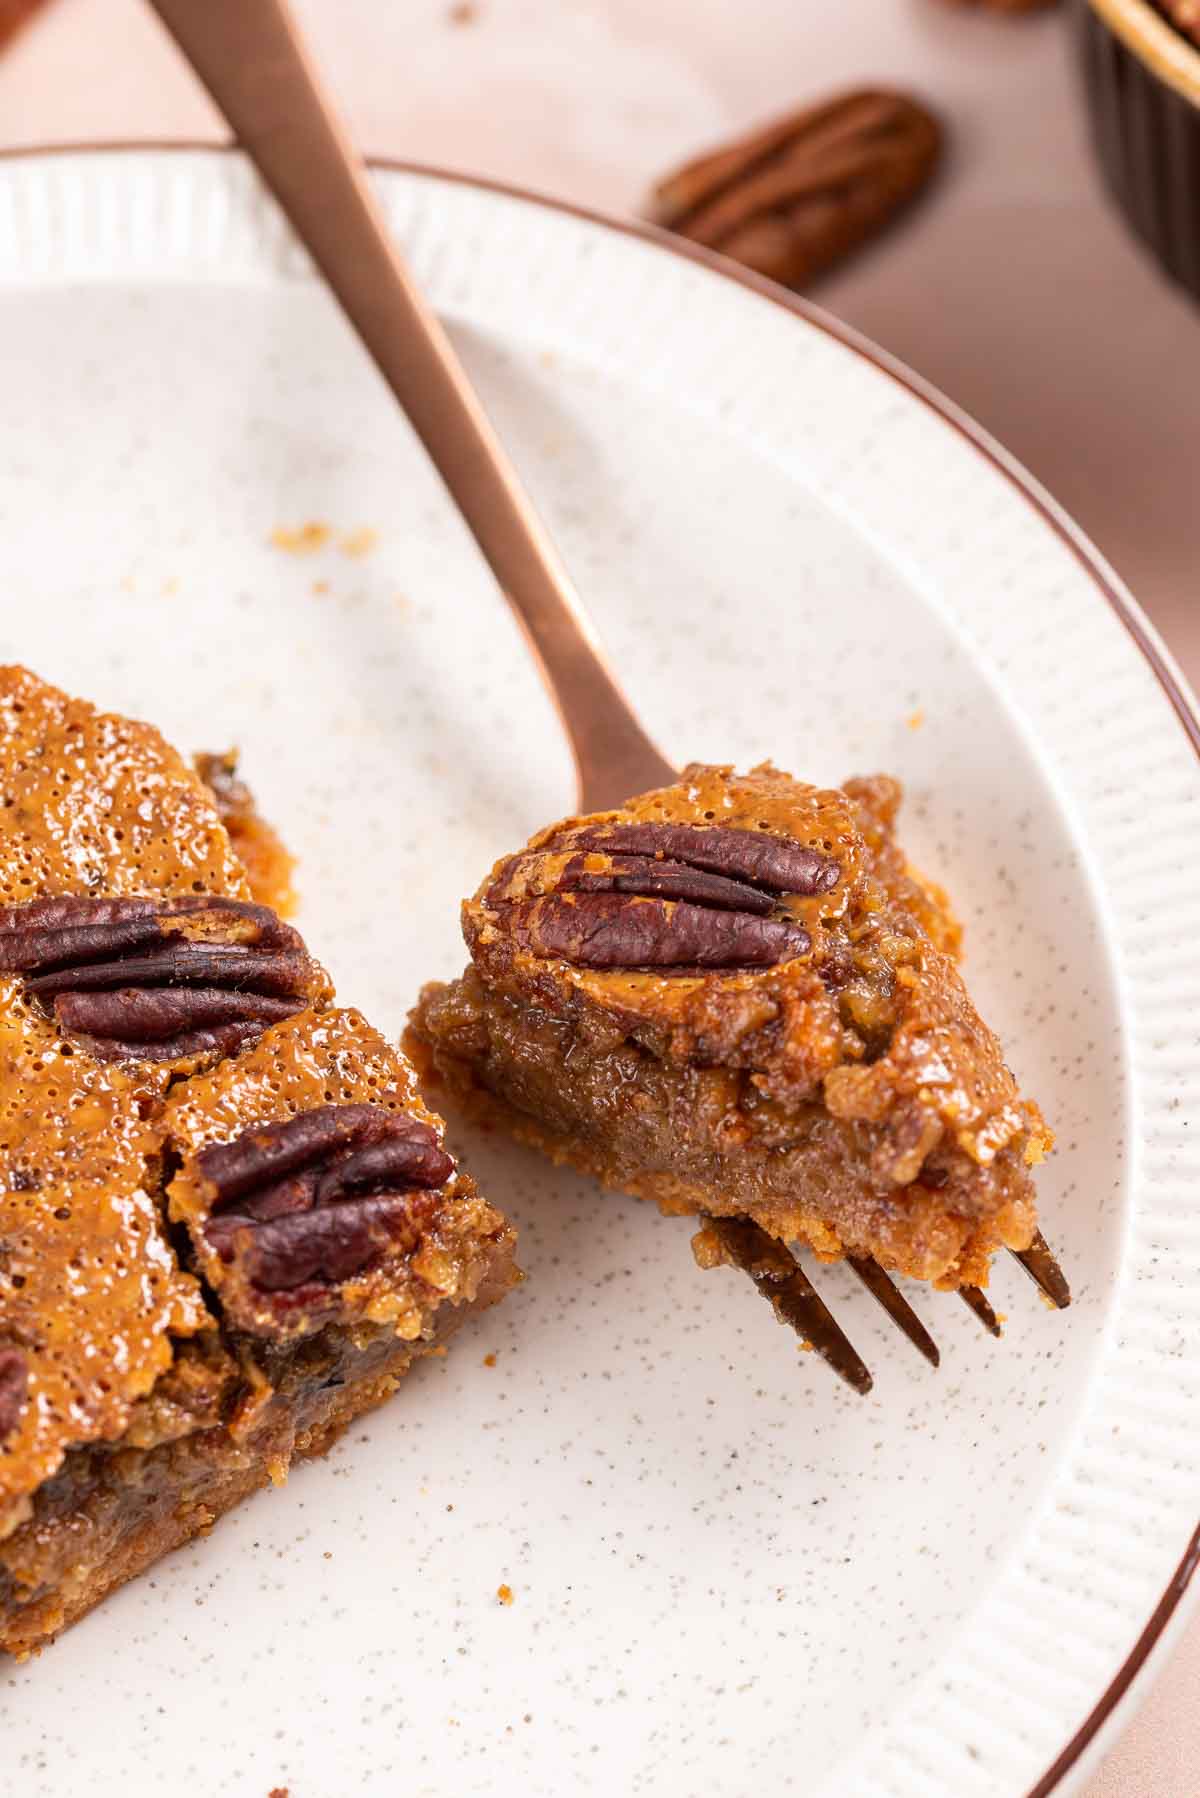 A fork cutting a bite out of a slice of pecan pie.